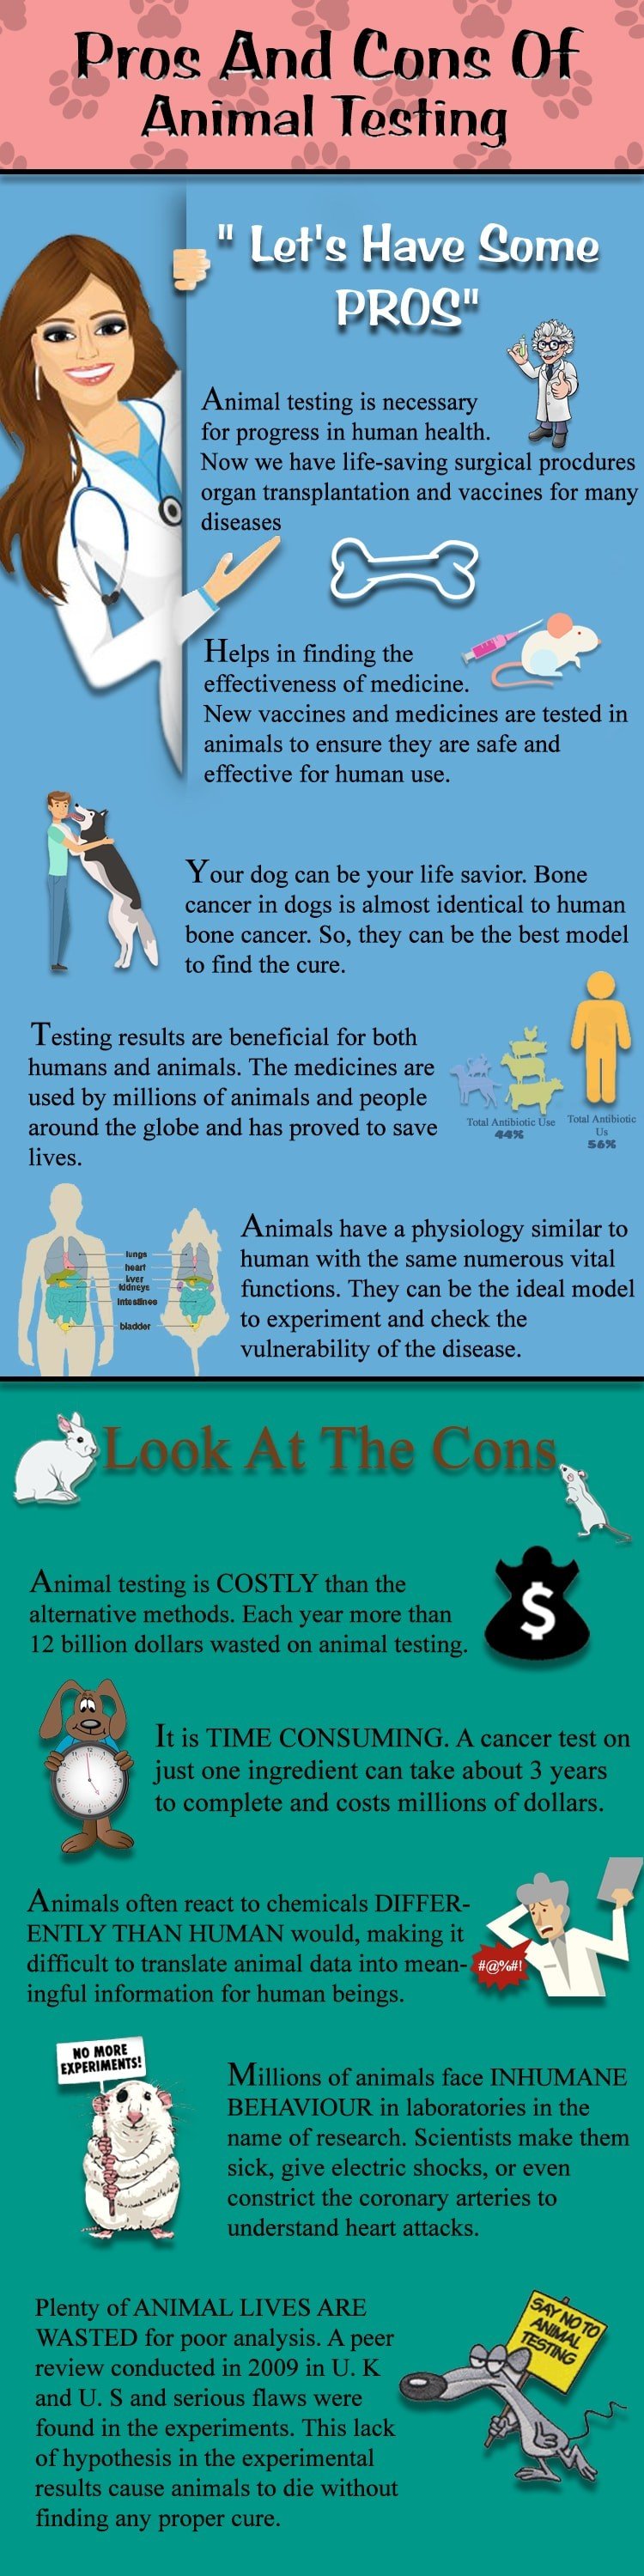 Infographic : Pros and cons of animal testing - Infographic.tv - Number ...